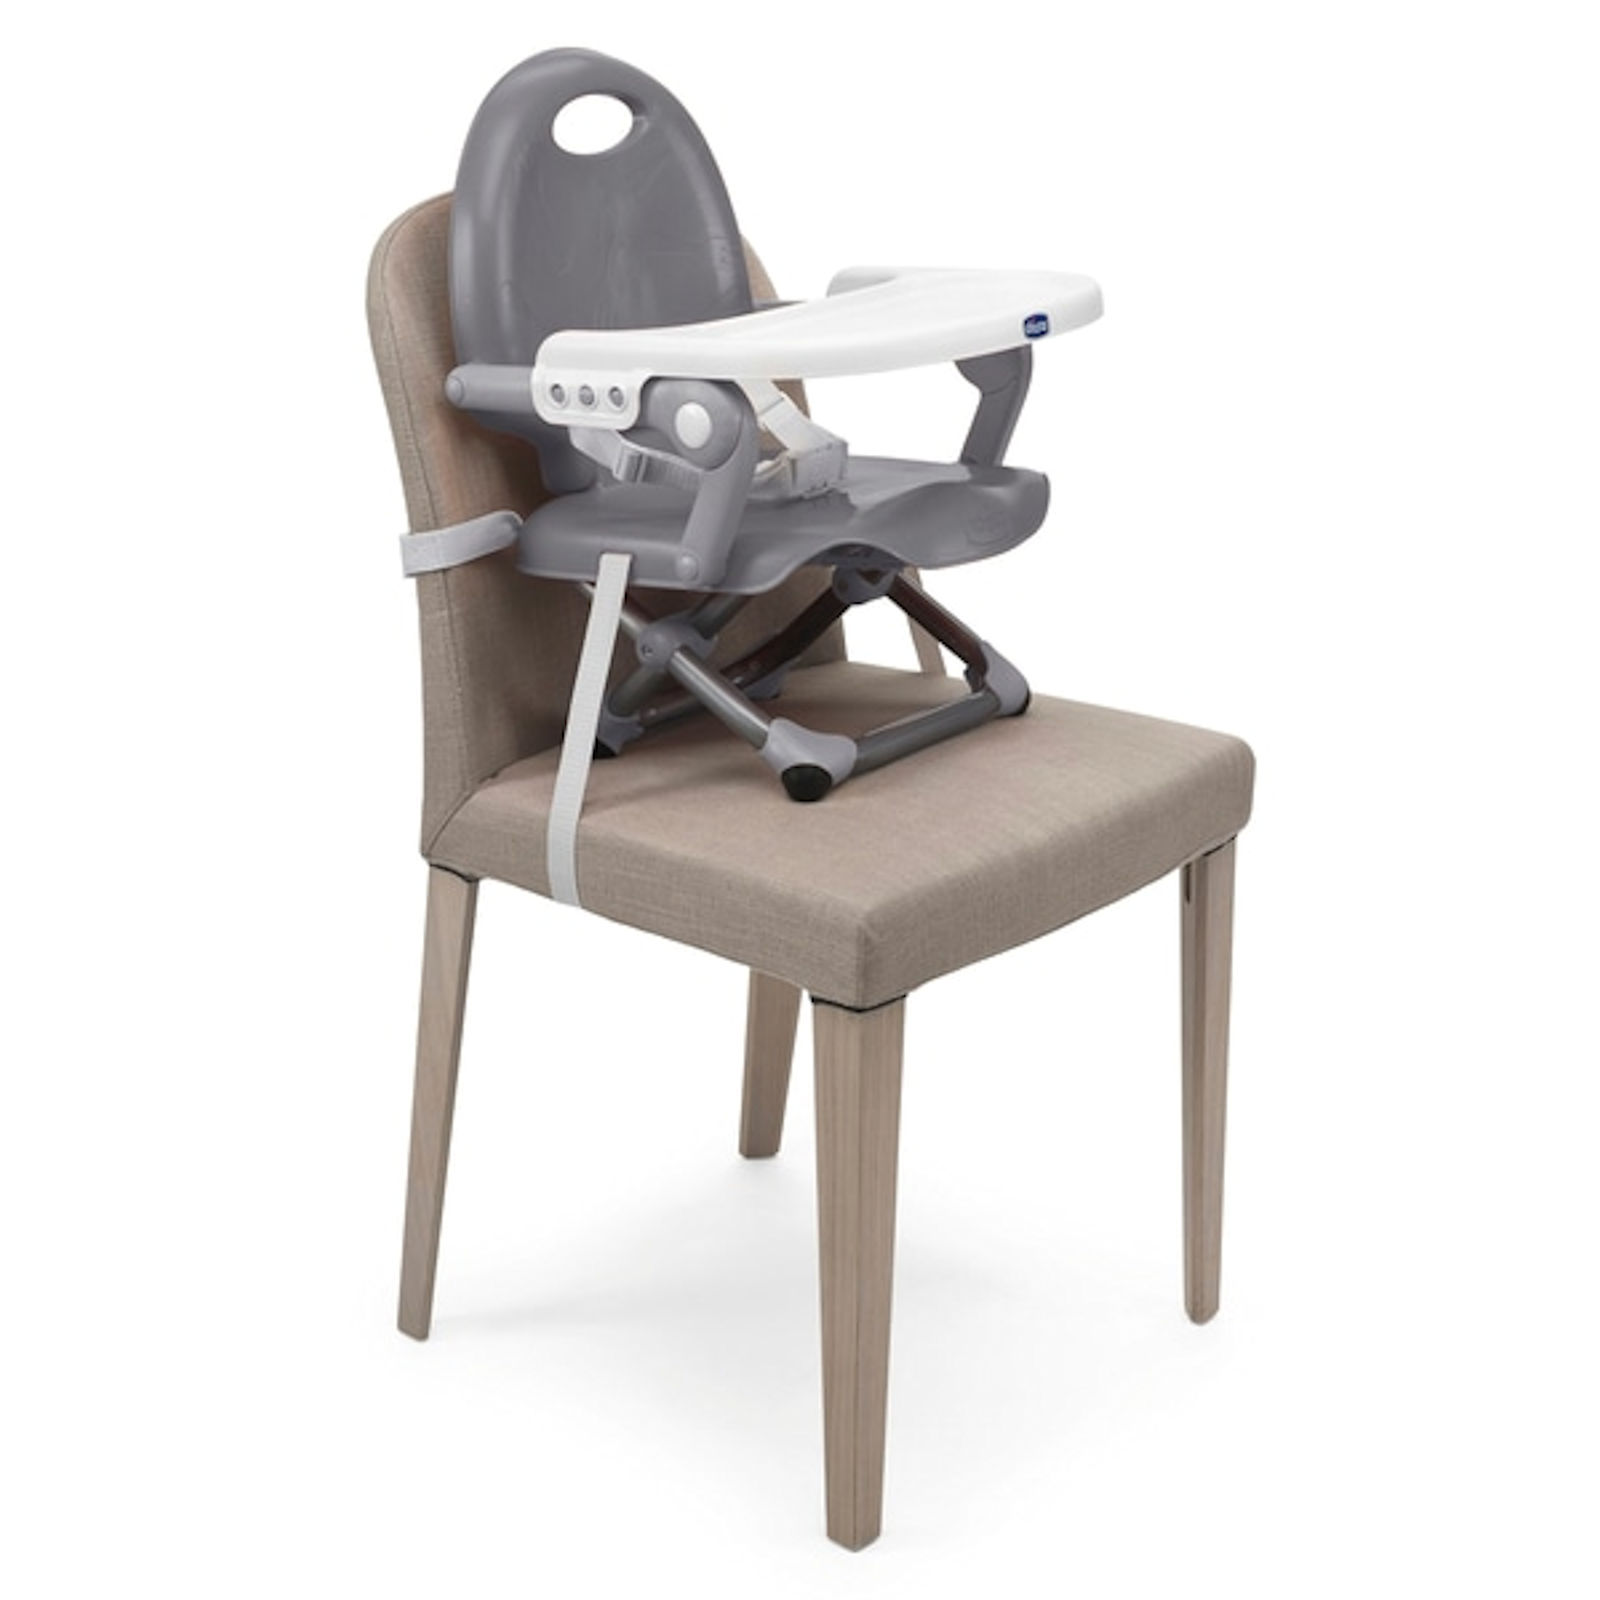 Chicco-Pocket-Snack-Booster-Seat-Grey-2